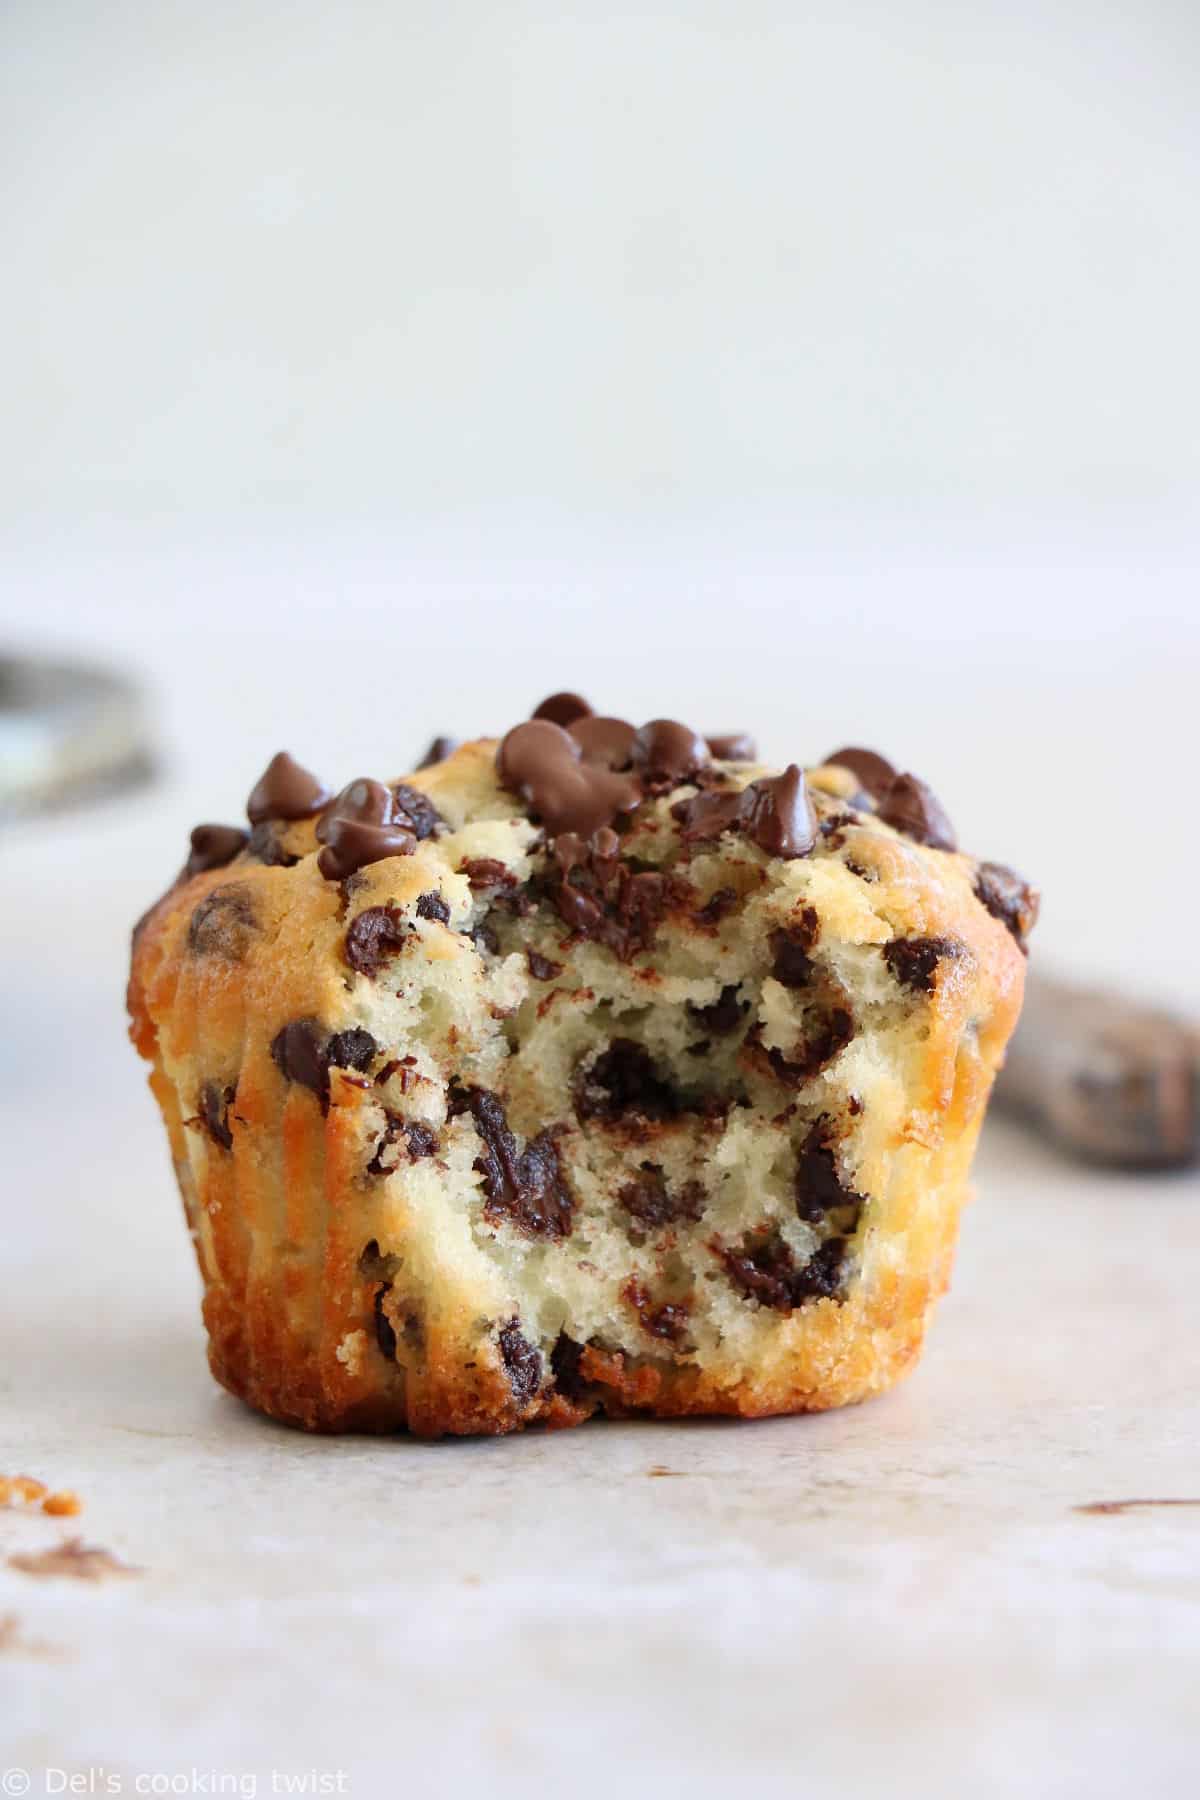 Chocolate Chip Muffins - Del's cooking twist